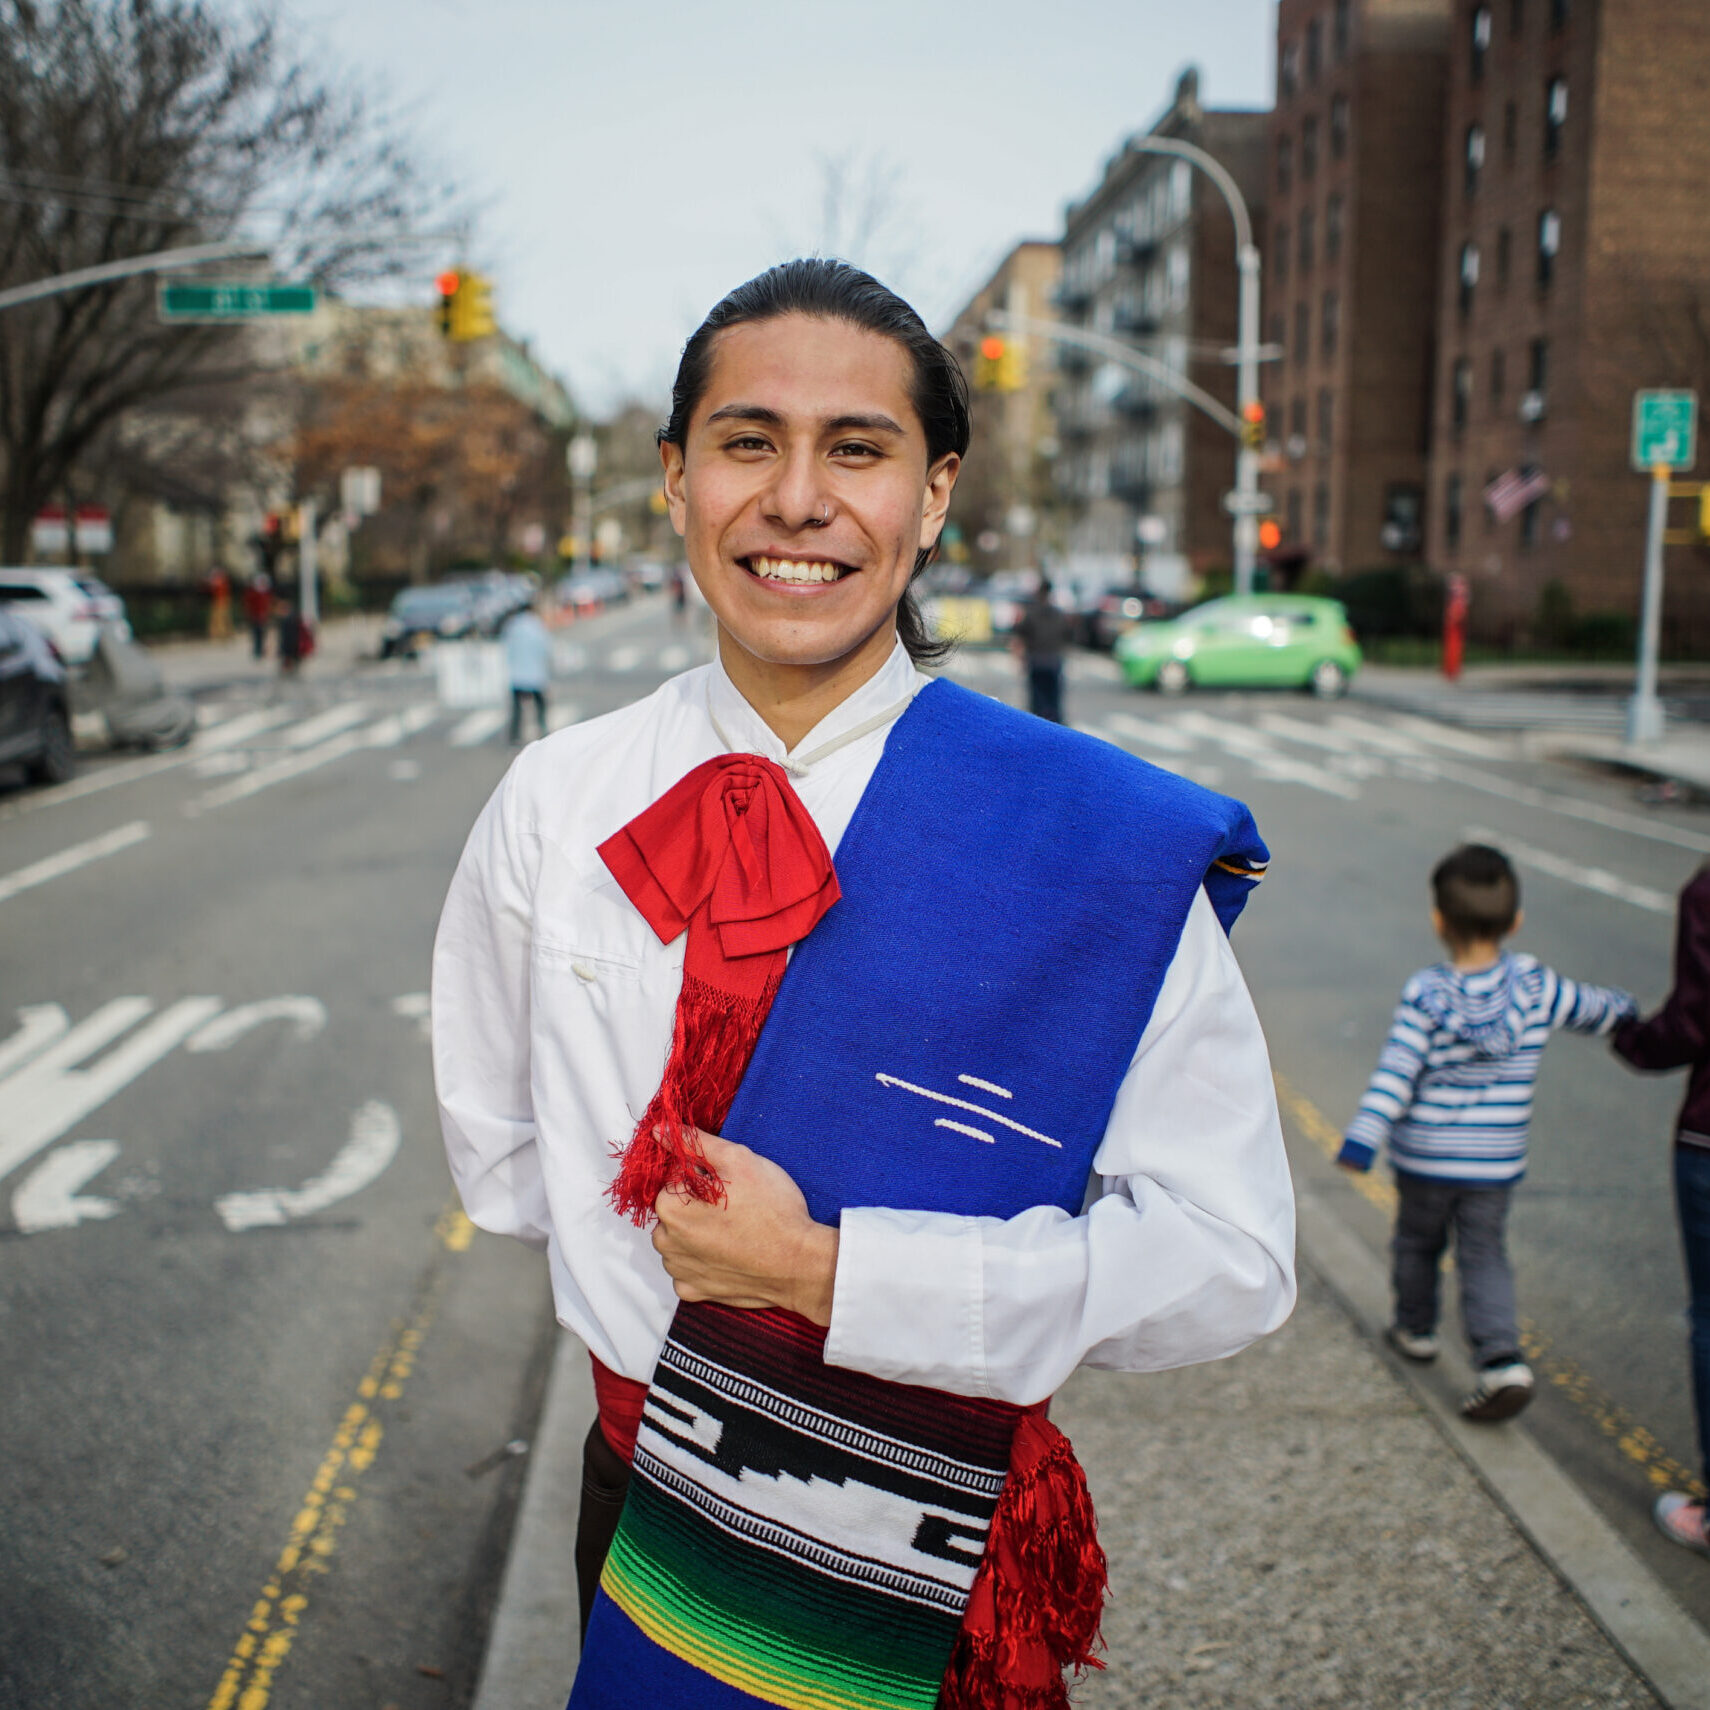 Erick Modesto stands on the median of 34th Avenue smiling and looking into the camera. Behind him, a boy balances on the curb of the median while a woman holds his hand. Erick is wearing a traditional ballet folklorico costume.